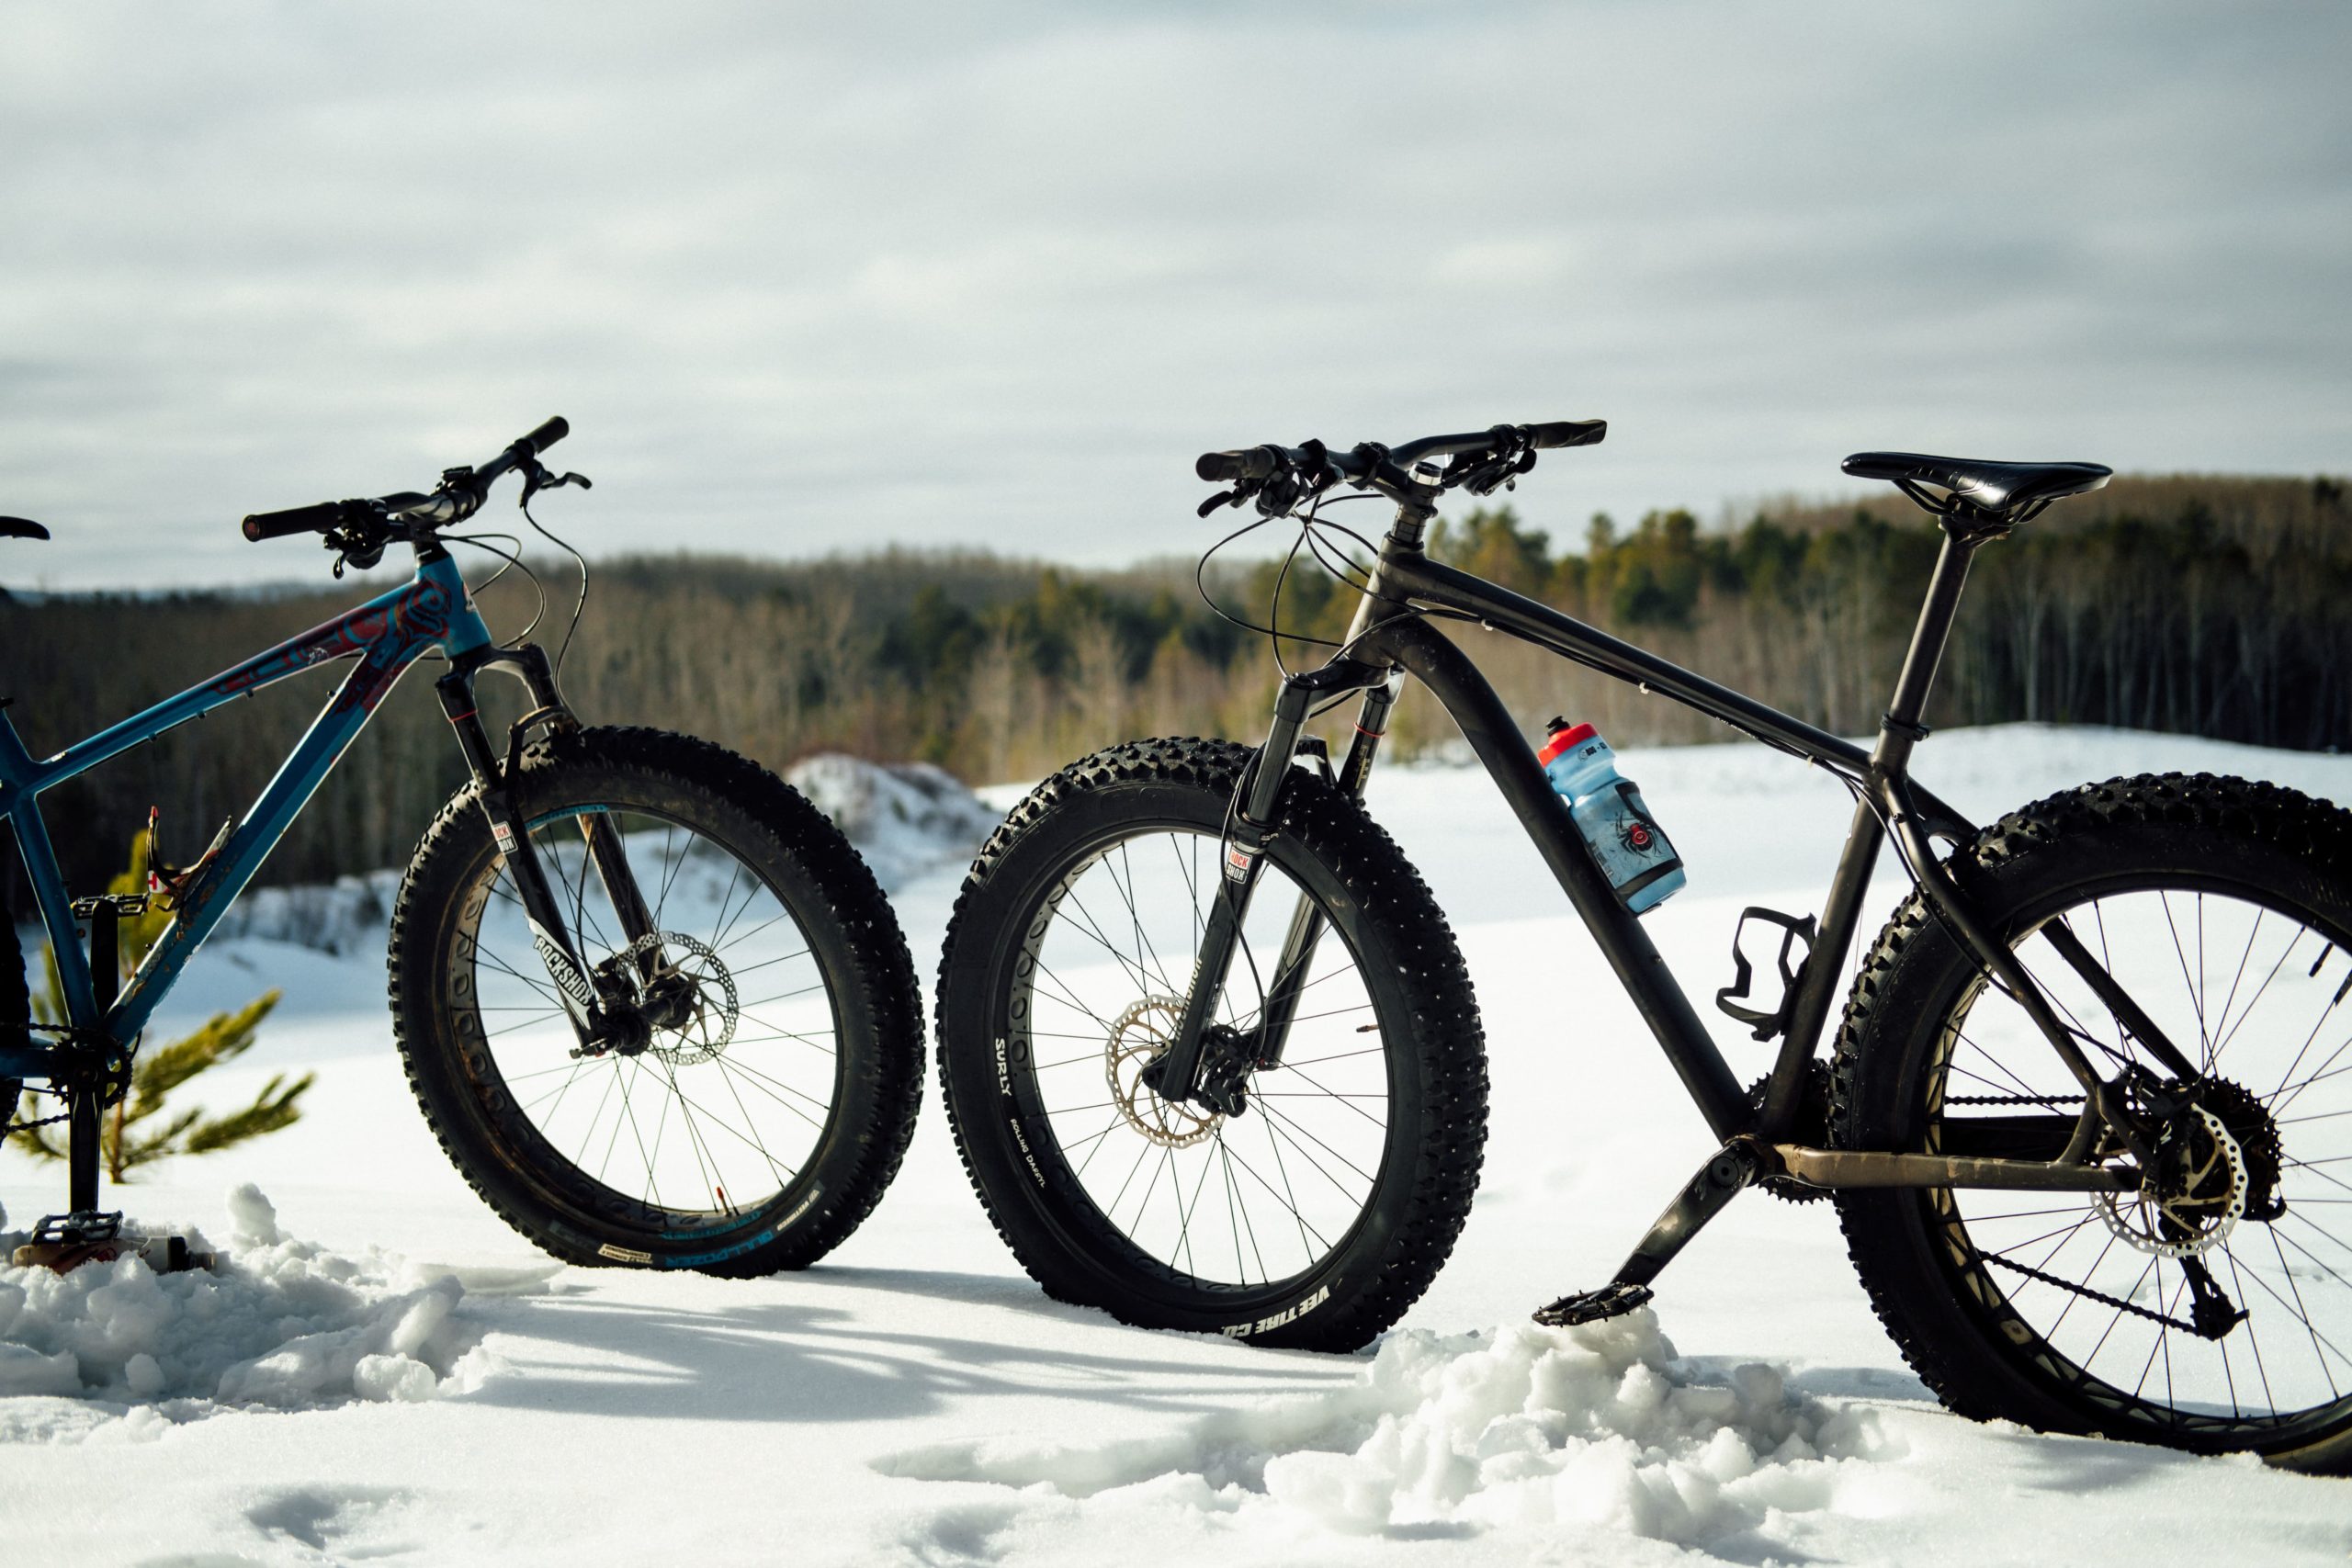 Two fat tire bikes face each other in the snow.